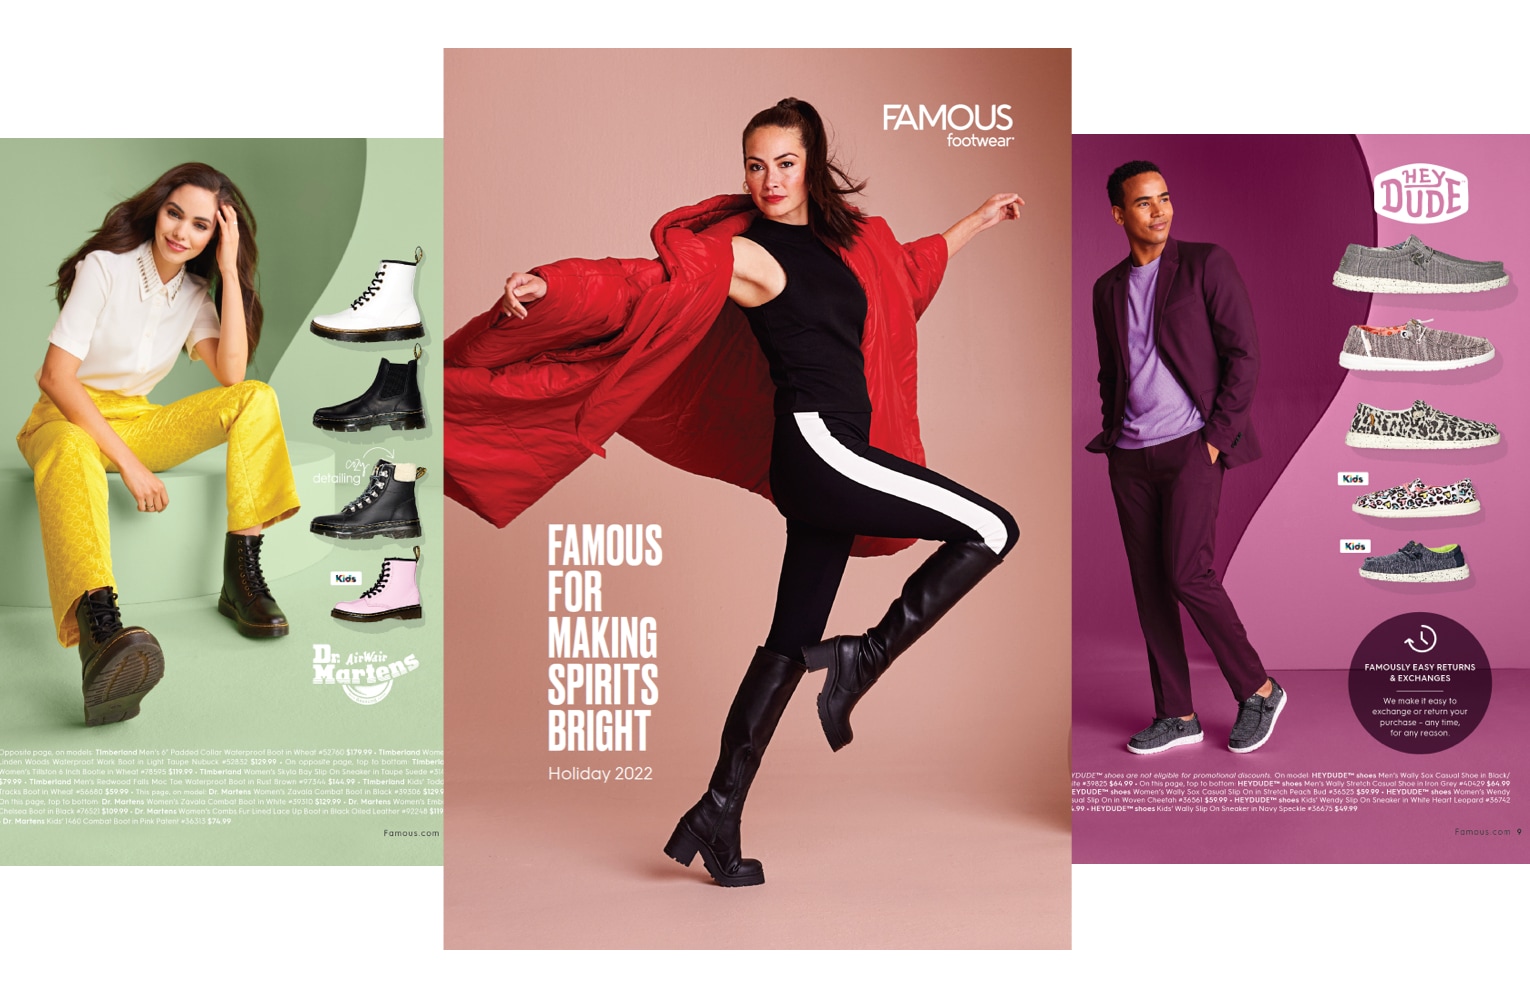 snippets of the famous footwear catalog